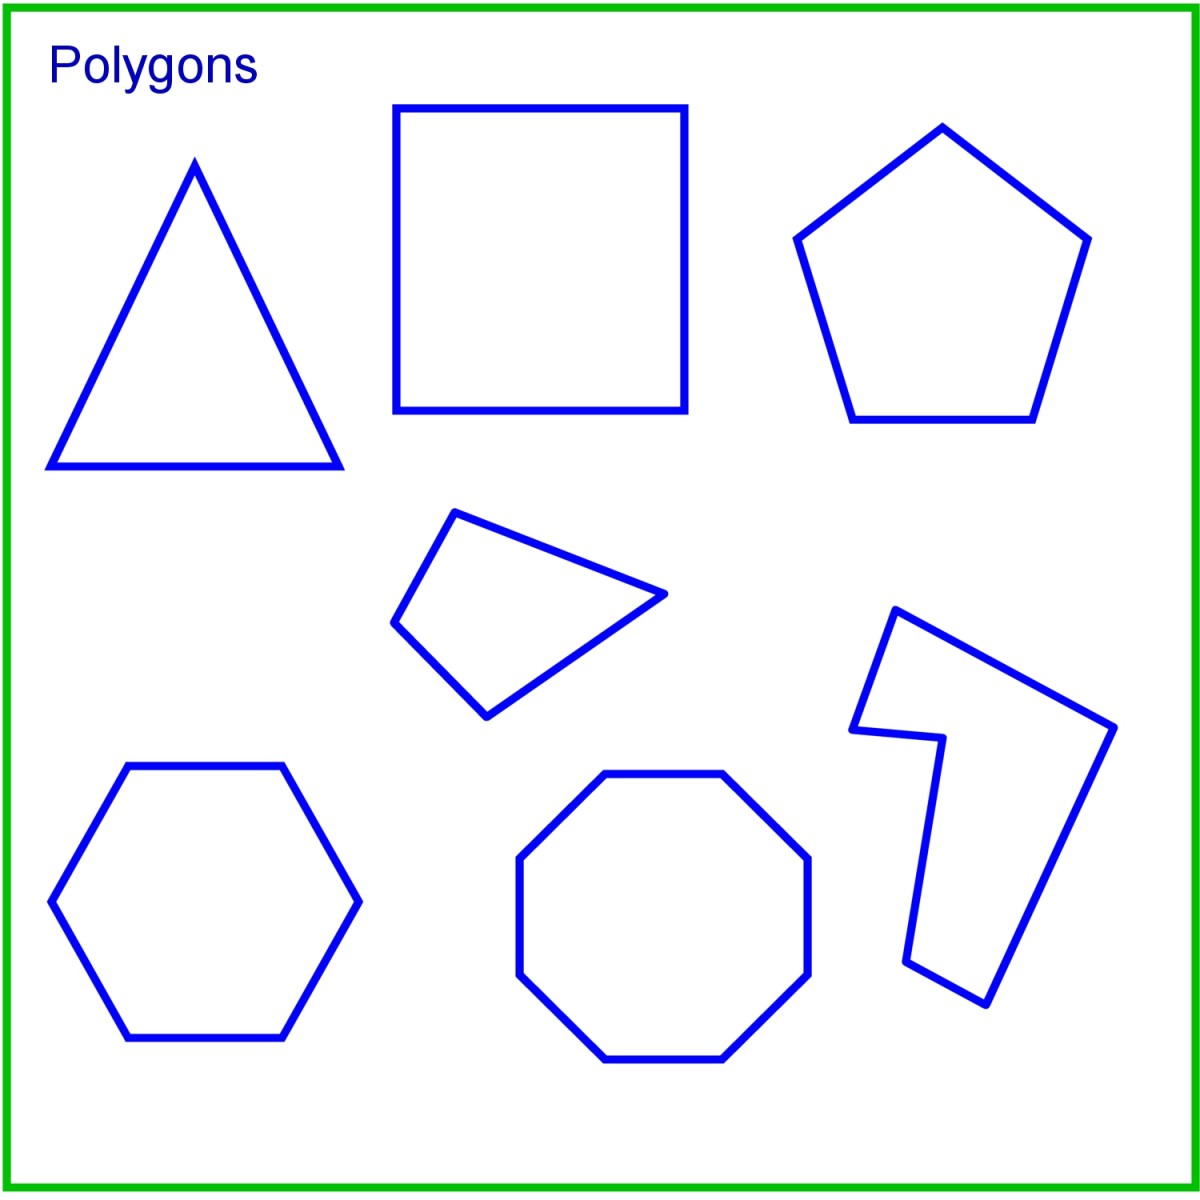 Polygons with different numbers of sides. Regular polgons have sides the same length.